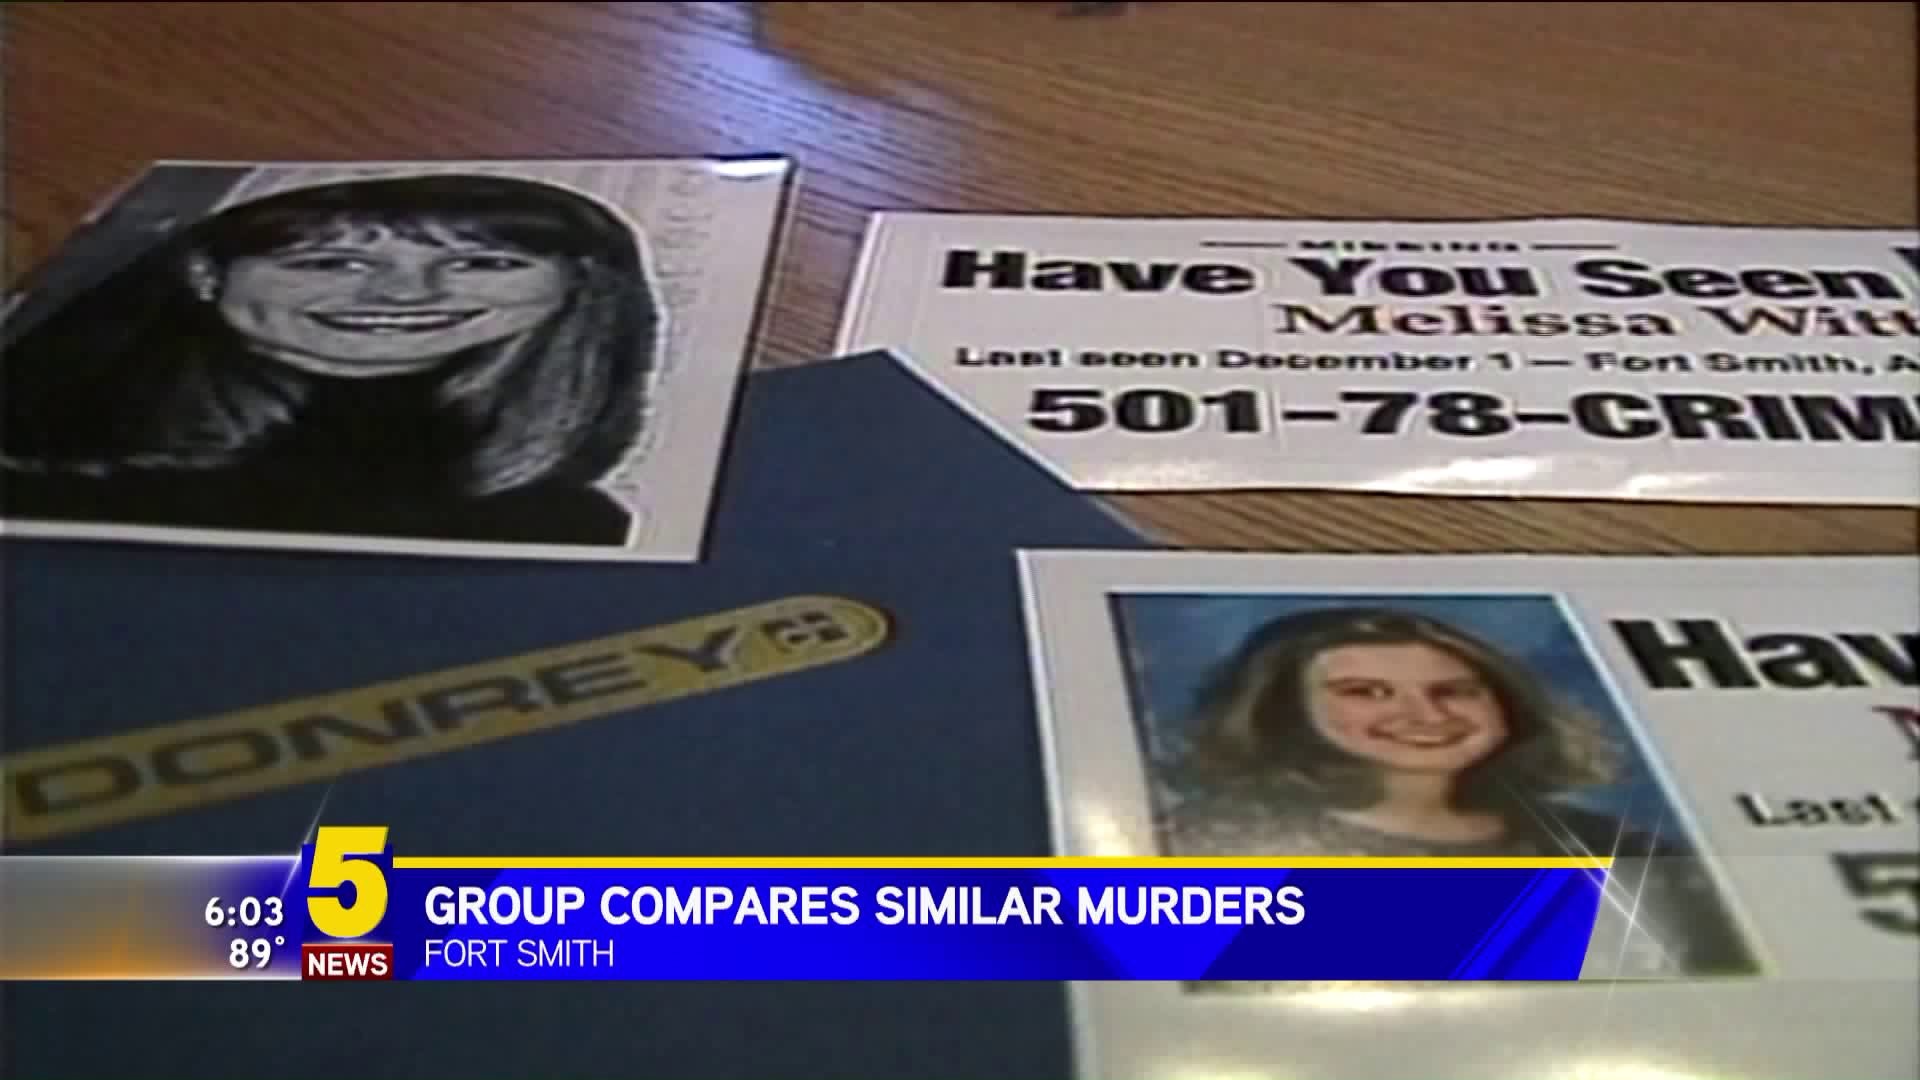 Group Compares Similar Murders